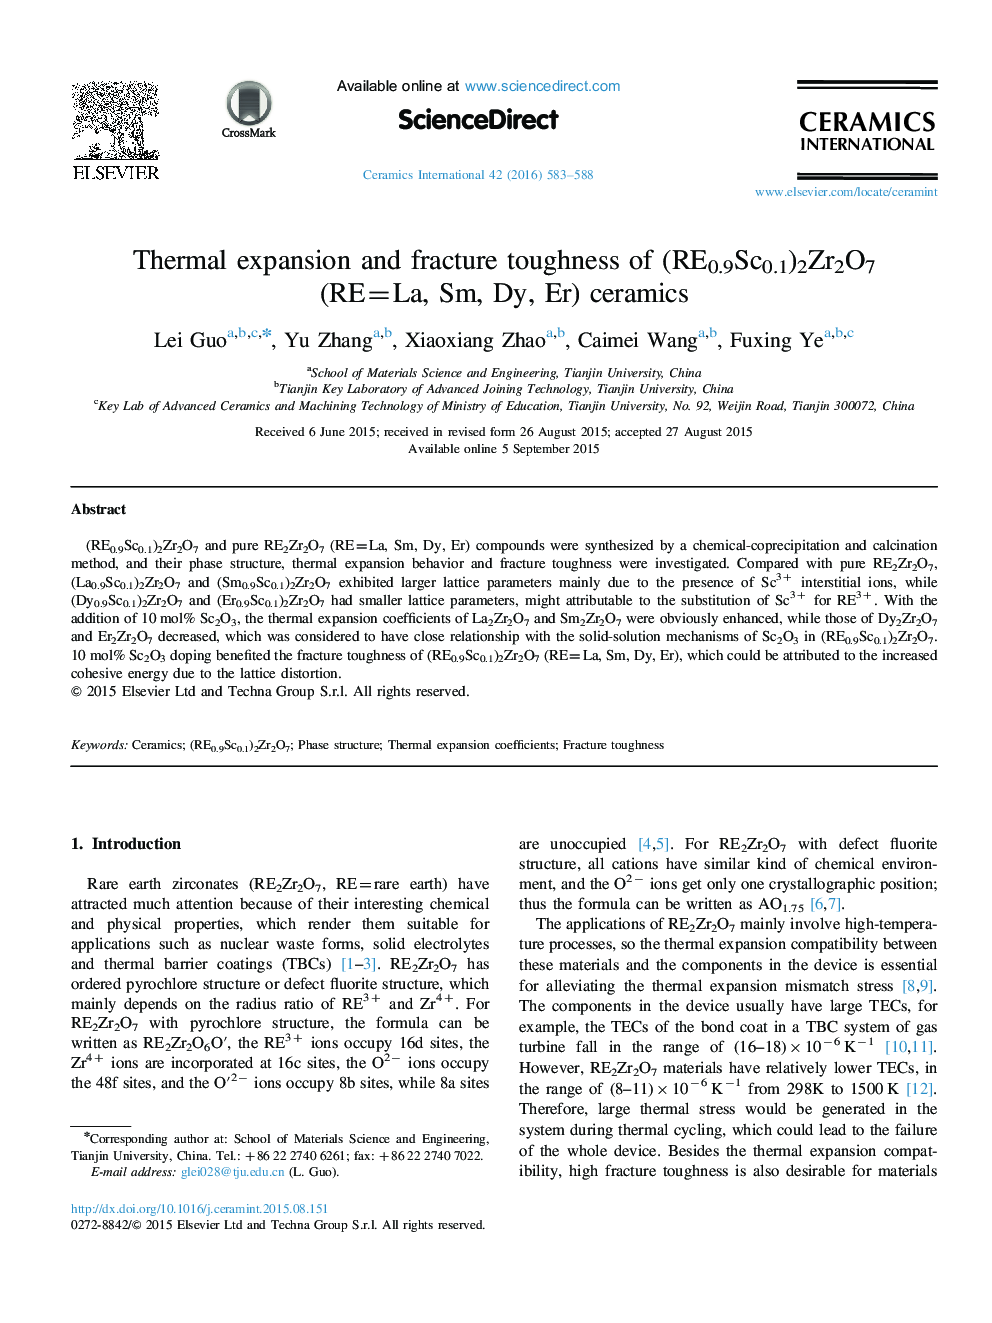 Thermal expansion and fracture toughness of (RE0.9Sc0.1)2Zr2O7 (RE=La, Sm, Dy, Er) ceramics